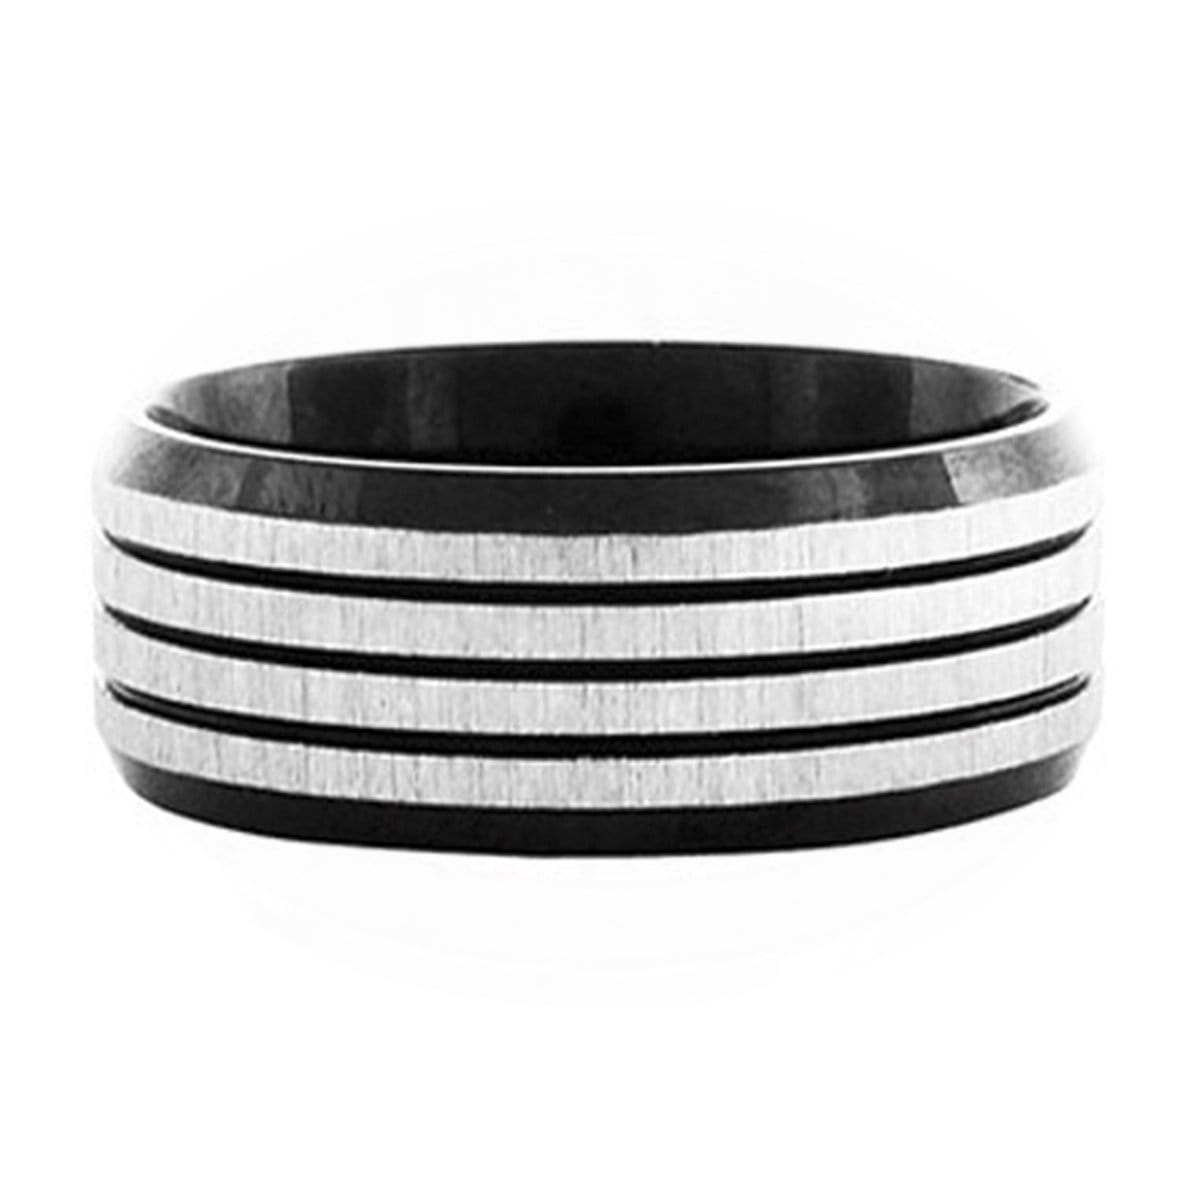 INOX JEWELRY Rings Black and Silver Tone Stainless Steel Quadruple Horizontal Stripe Ring